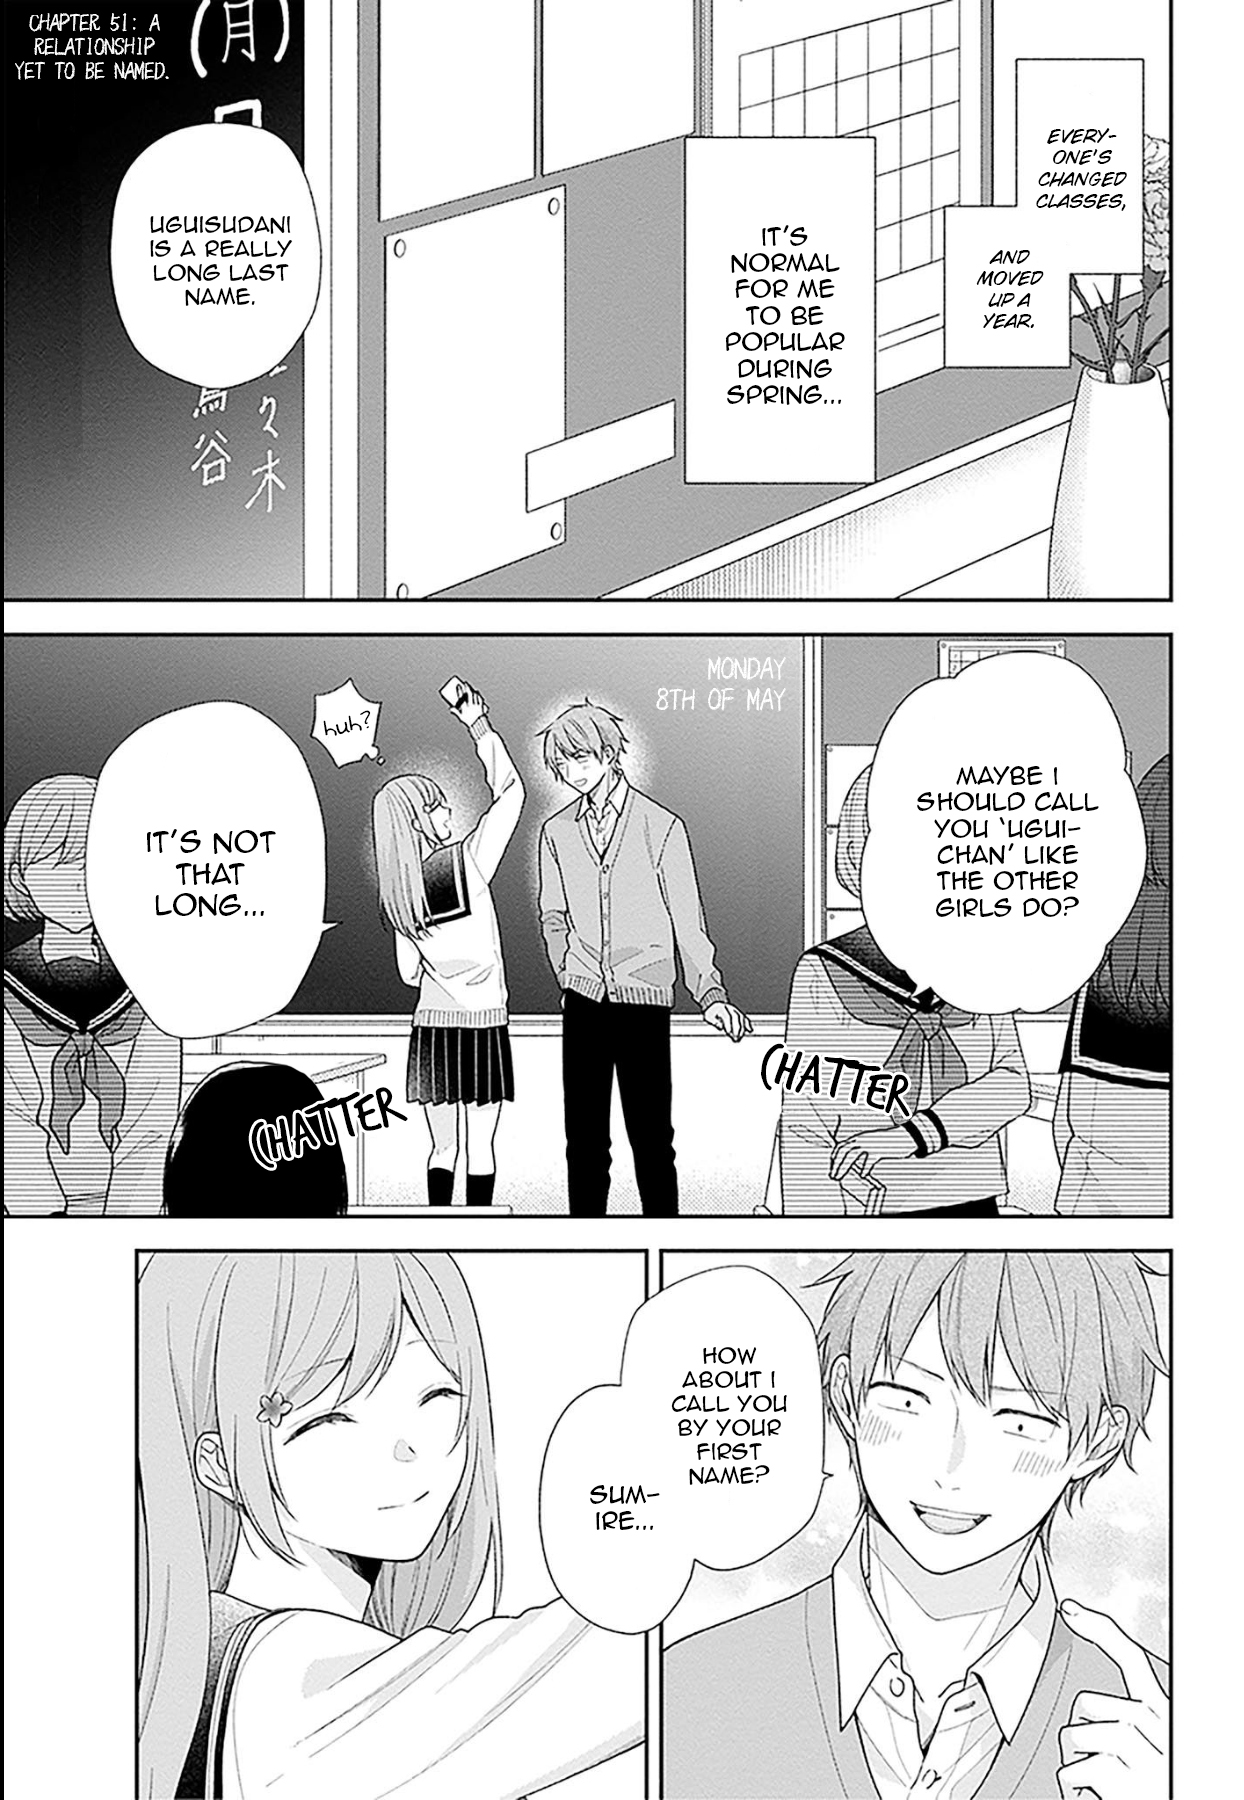 A Bouquet For An Ugly Girl. Vol.9 Chapter 51